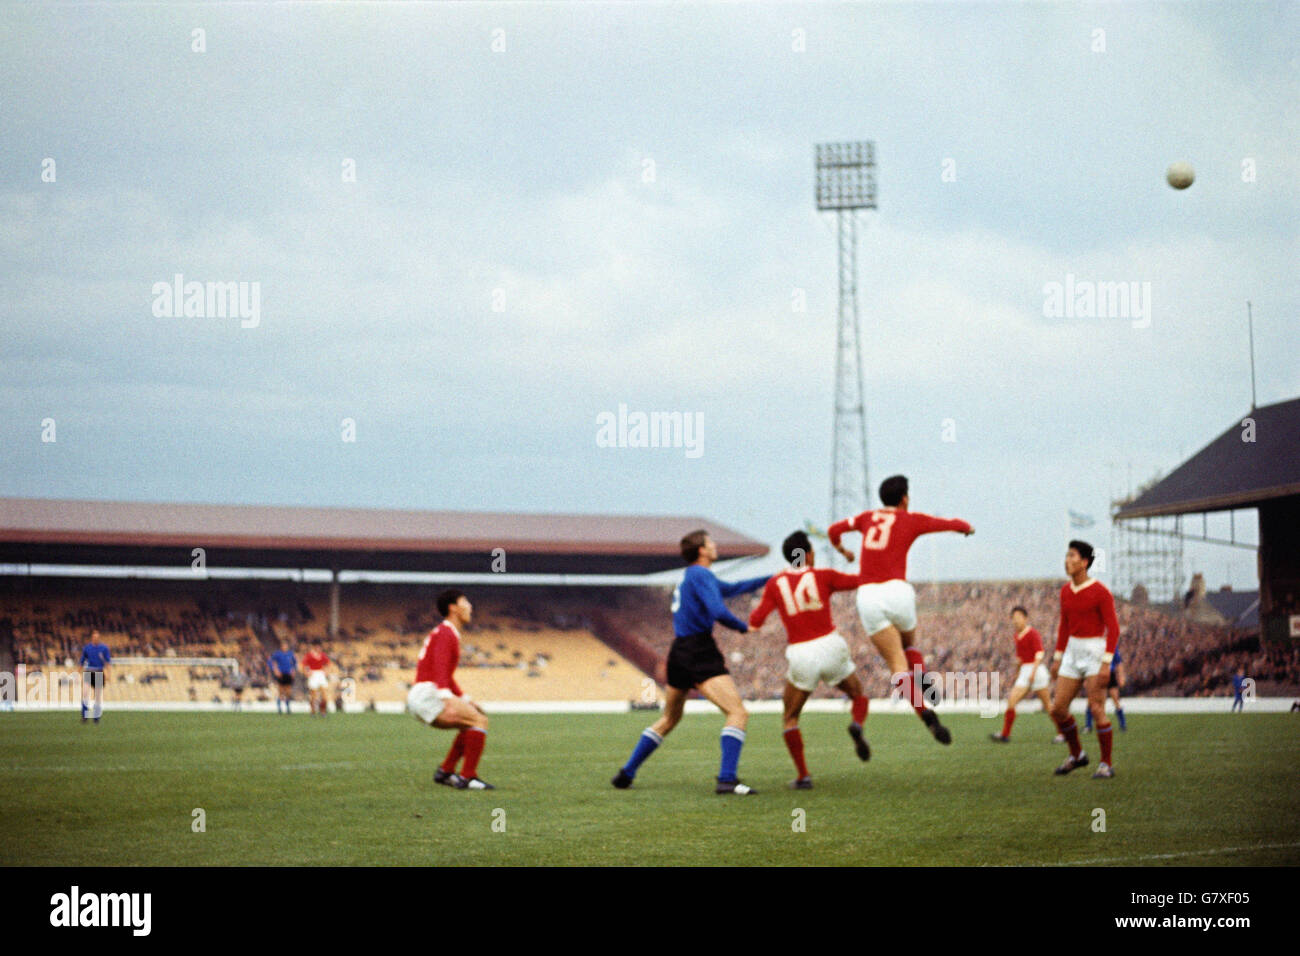 Soccer - World Cup England 1966 - Group Four - Italy v North Korea - Ayresome Park. North Korea's Shin Yung Kyoo (second r) heads clear, watched by teammate Ha Jung Won (c) Stock Photo